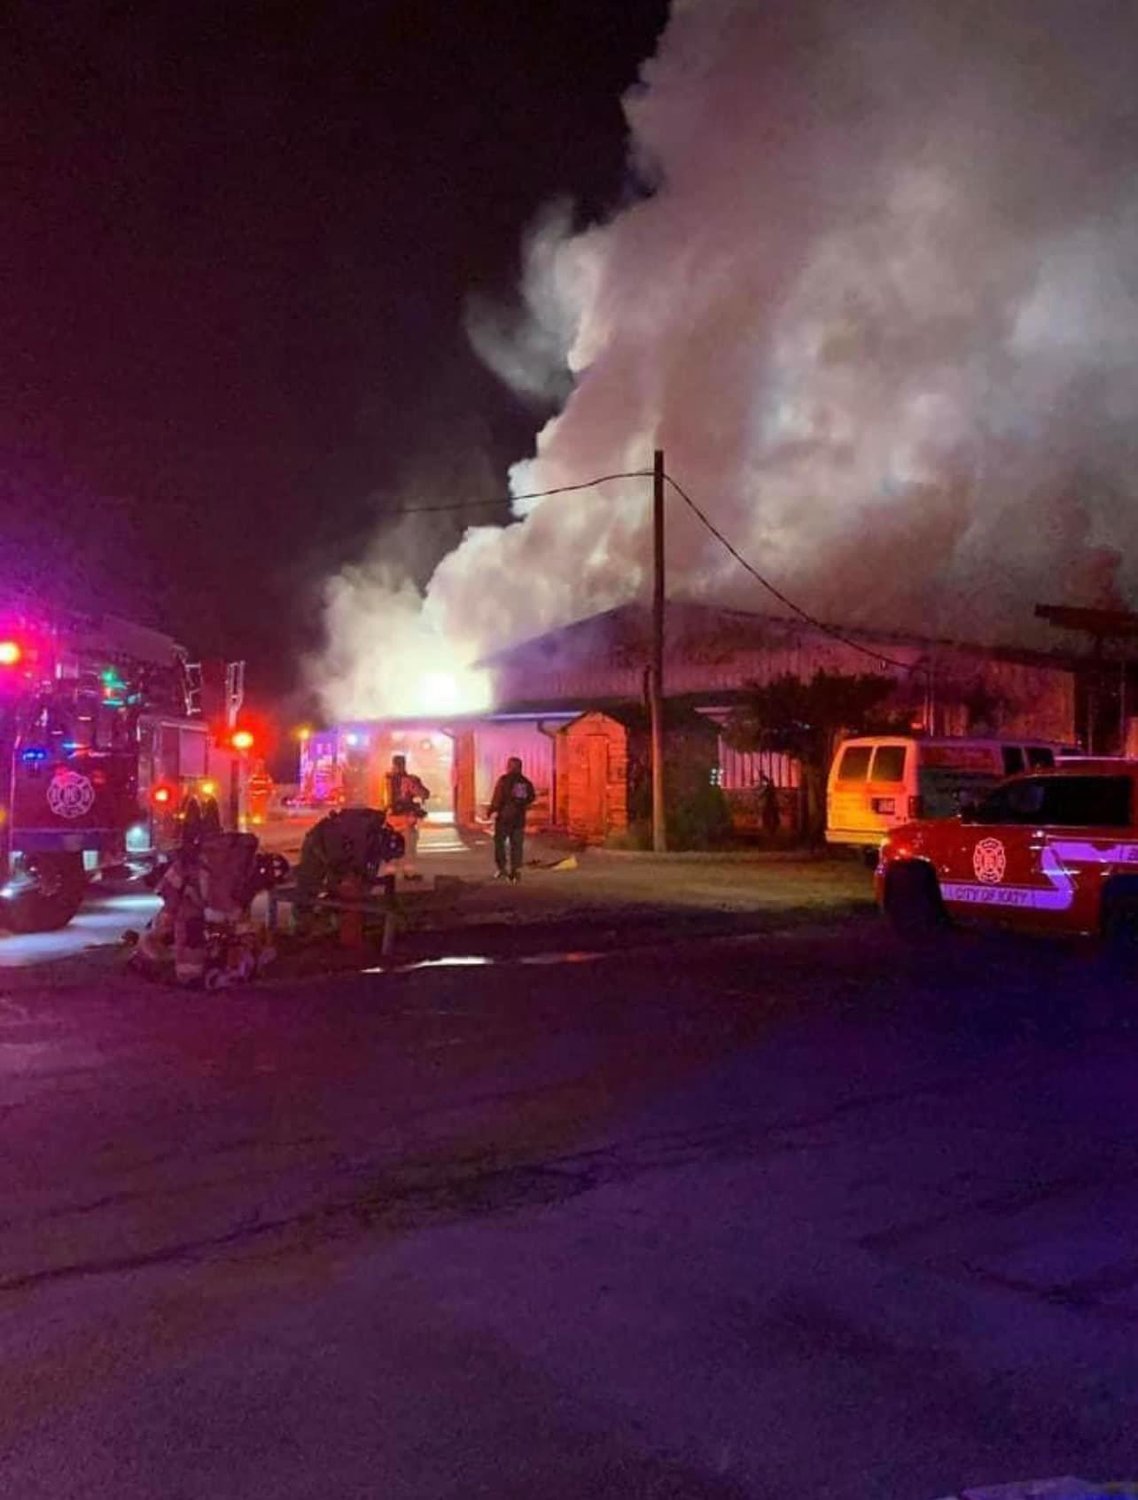 Multiple fire departments worked in tandem to fight the Midway BBQ fire, but damage was still severe. No firefighters or civilians were injured in the blaze.